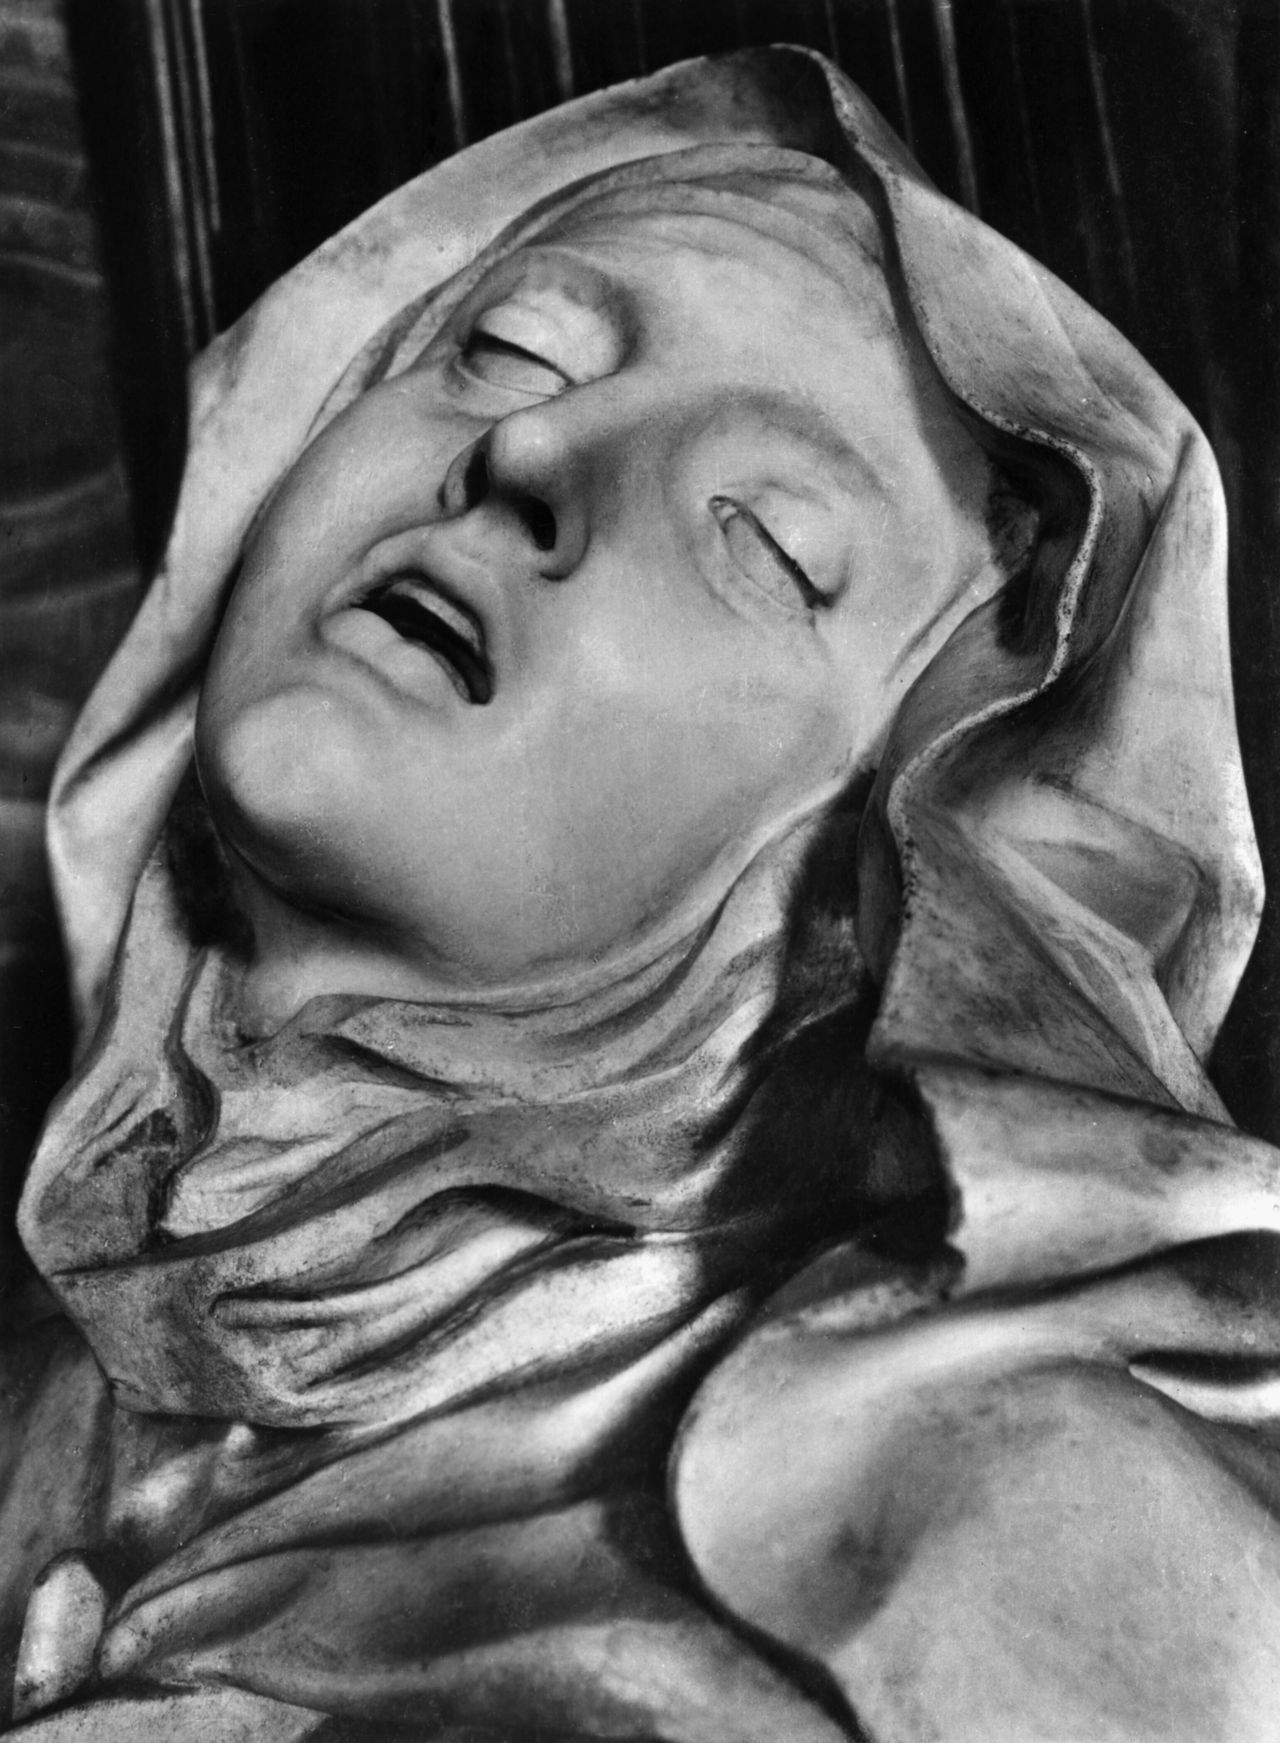 Saint Teresa in ecstacy. Detail from Bernini's famed sculpture group in Church os St. Maria Vittoria. BPA2# 1665